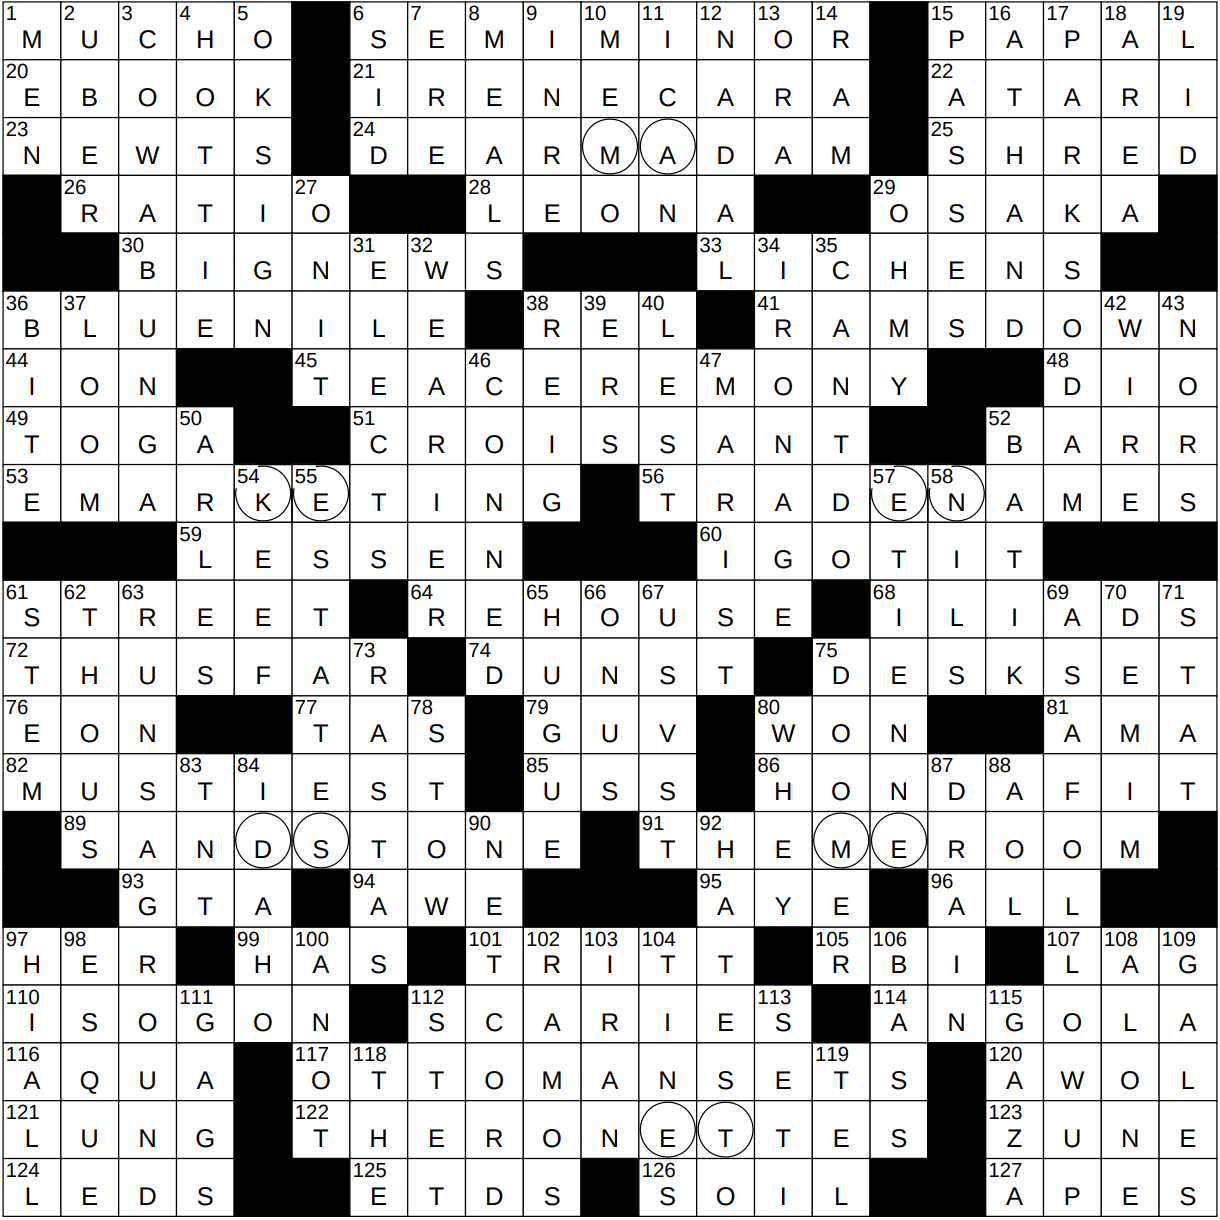 Кроссворд на 16 слов. The New York times crossword Puzzle. Кроссворд 16 на 16. Белая гвардия кроссворд. It is time to Play crossword.